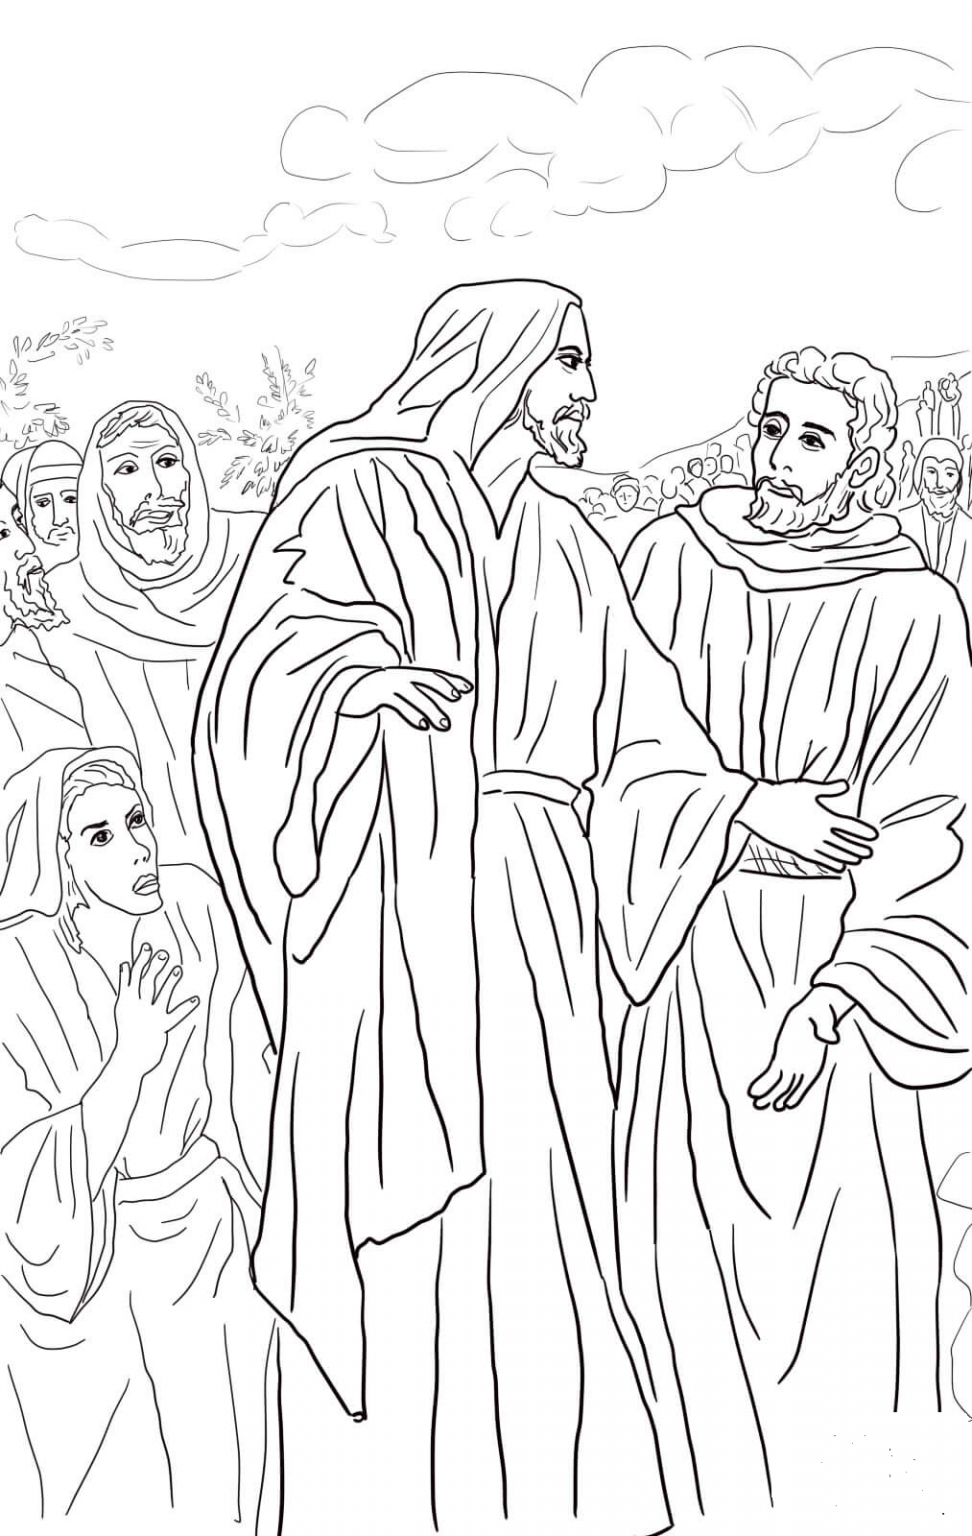 Jesus Heals the Bleeding Woman coloring page - ColouringPages